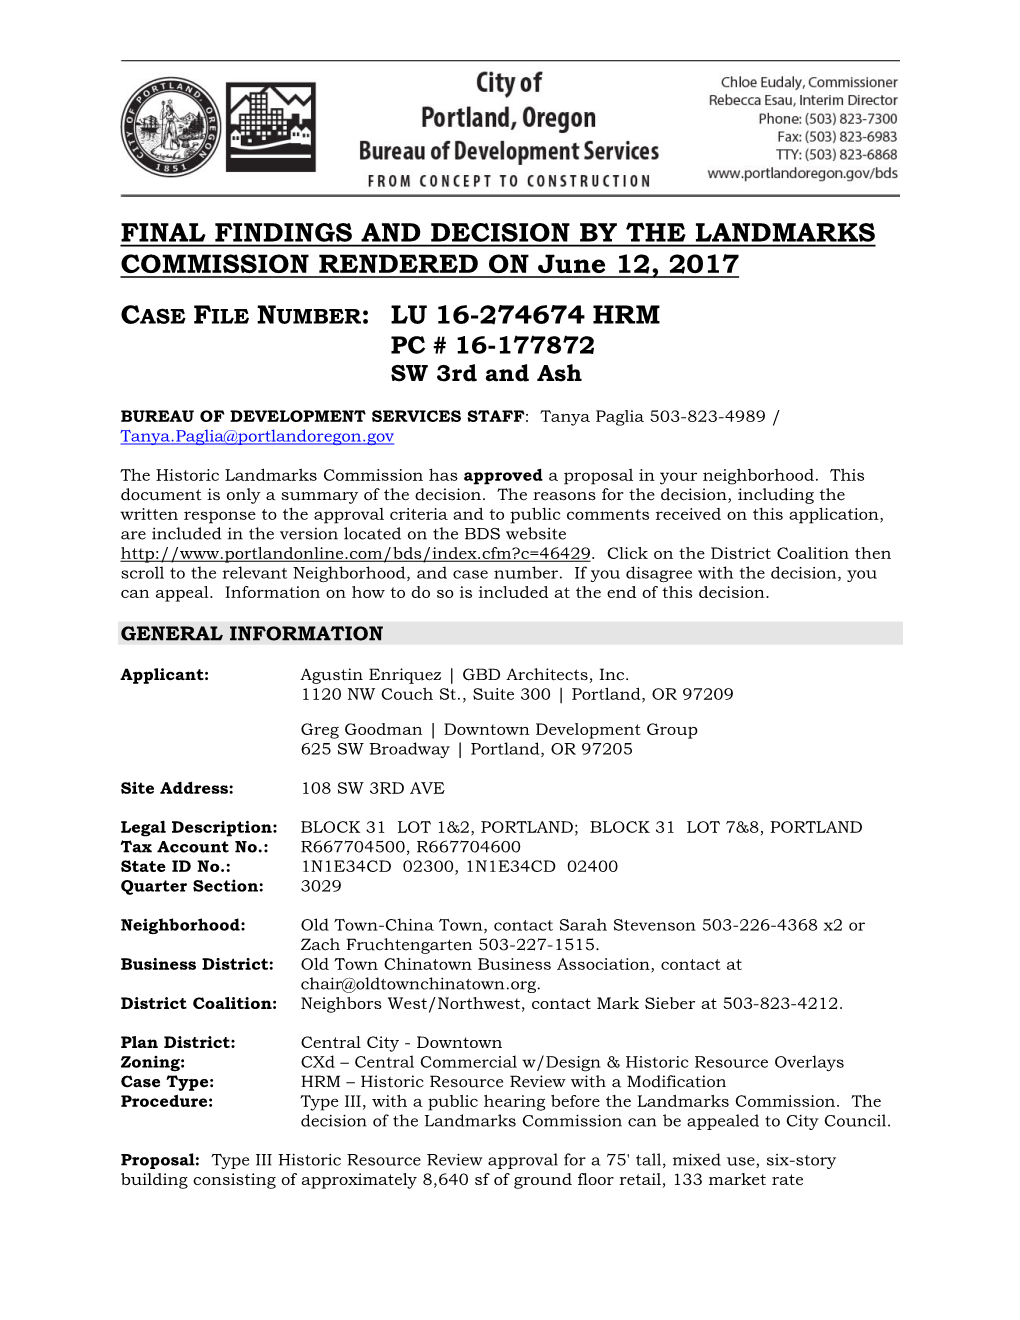 FINAL FINDINGS and DECISION by the LANDMARKS COMMISSION RENDERED on June 12, 2017